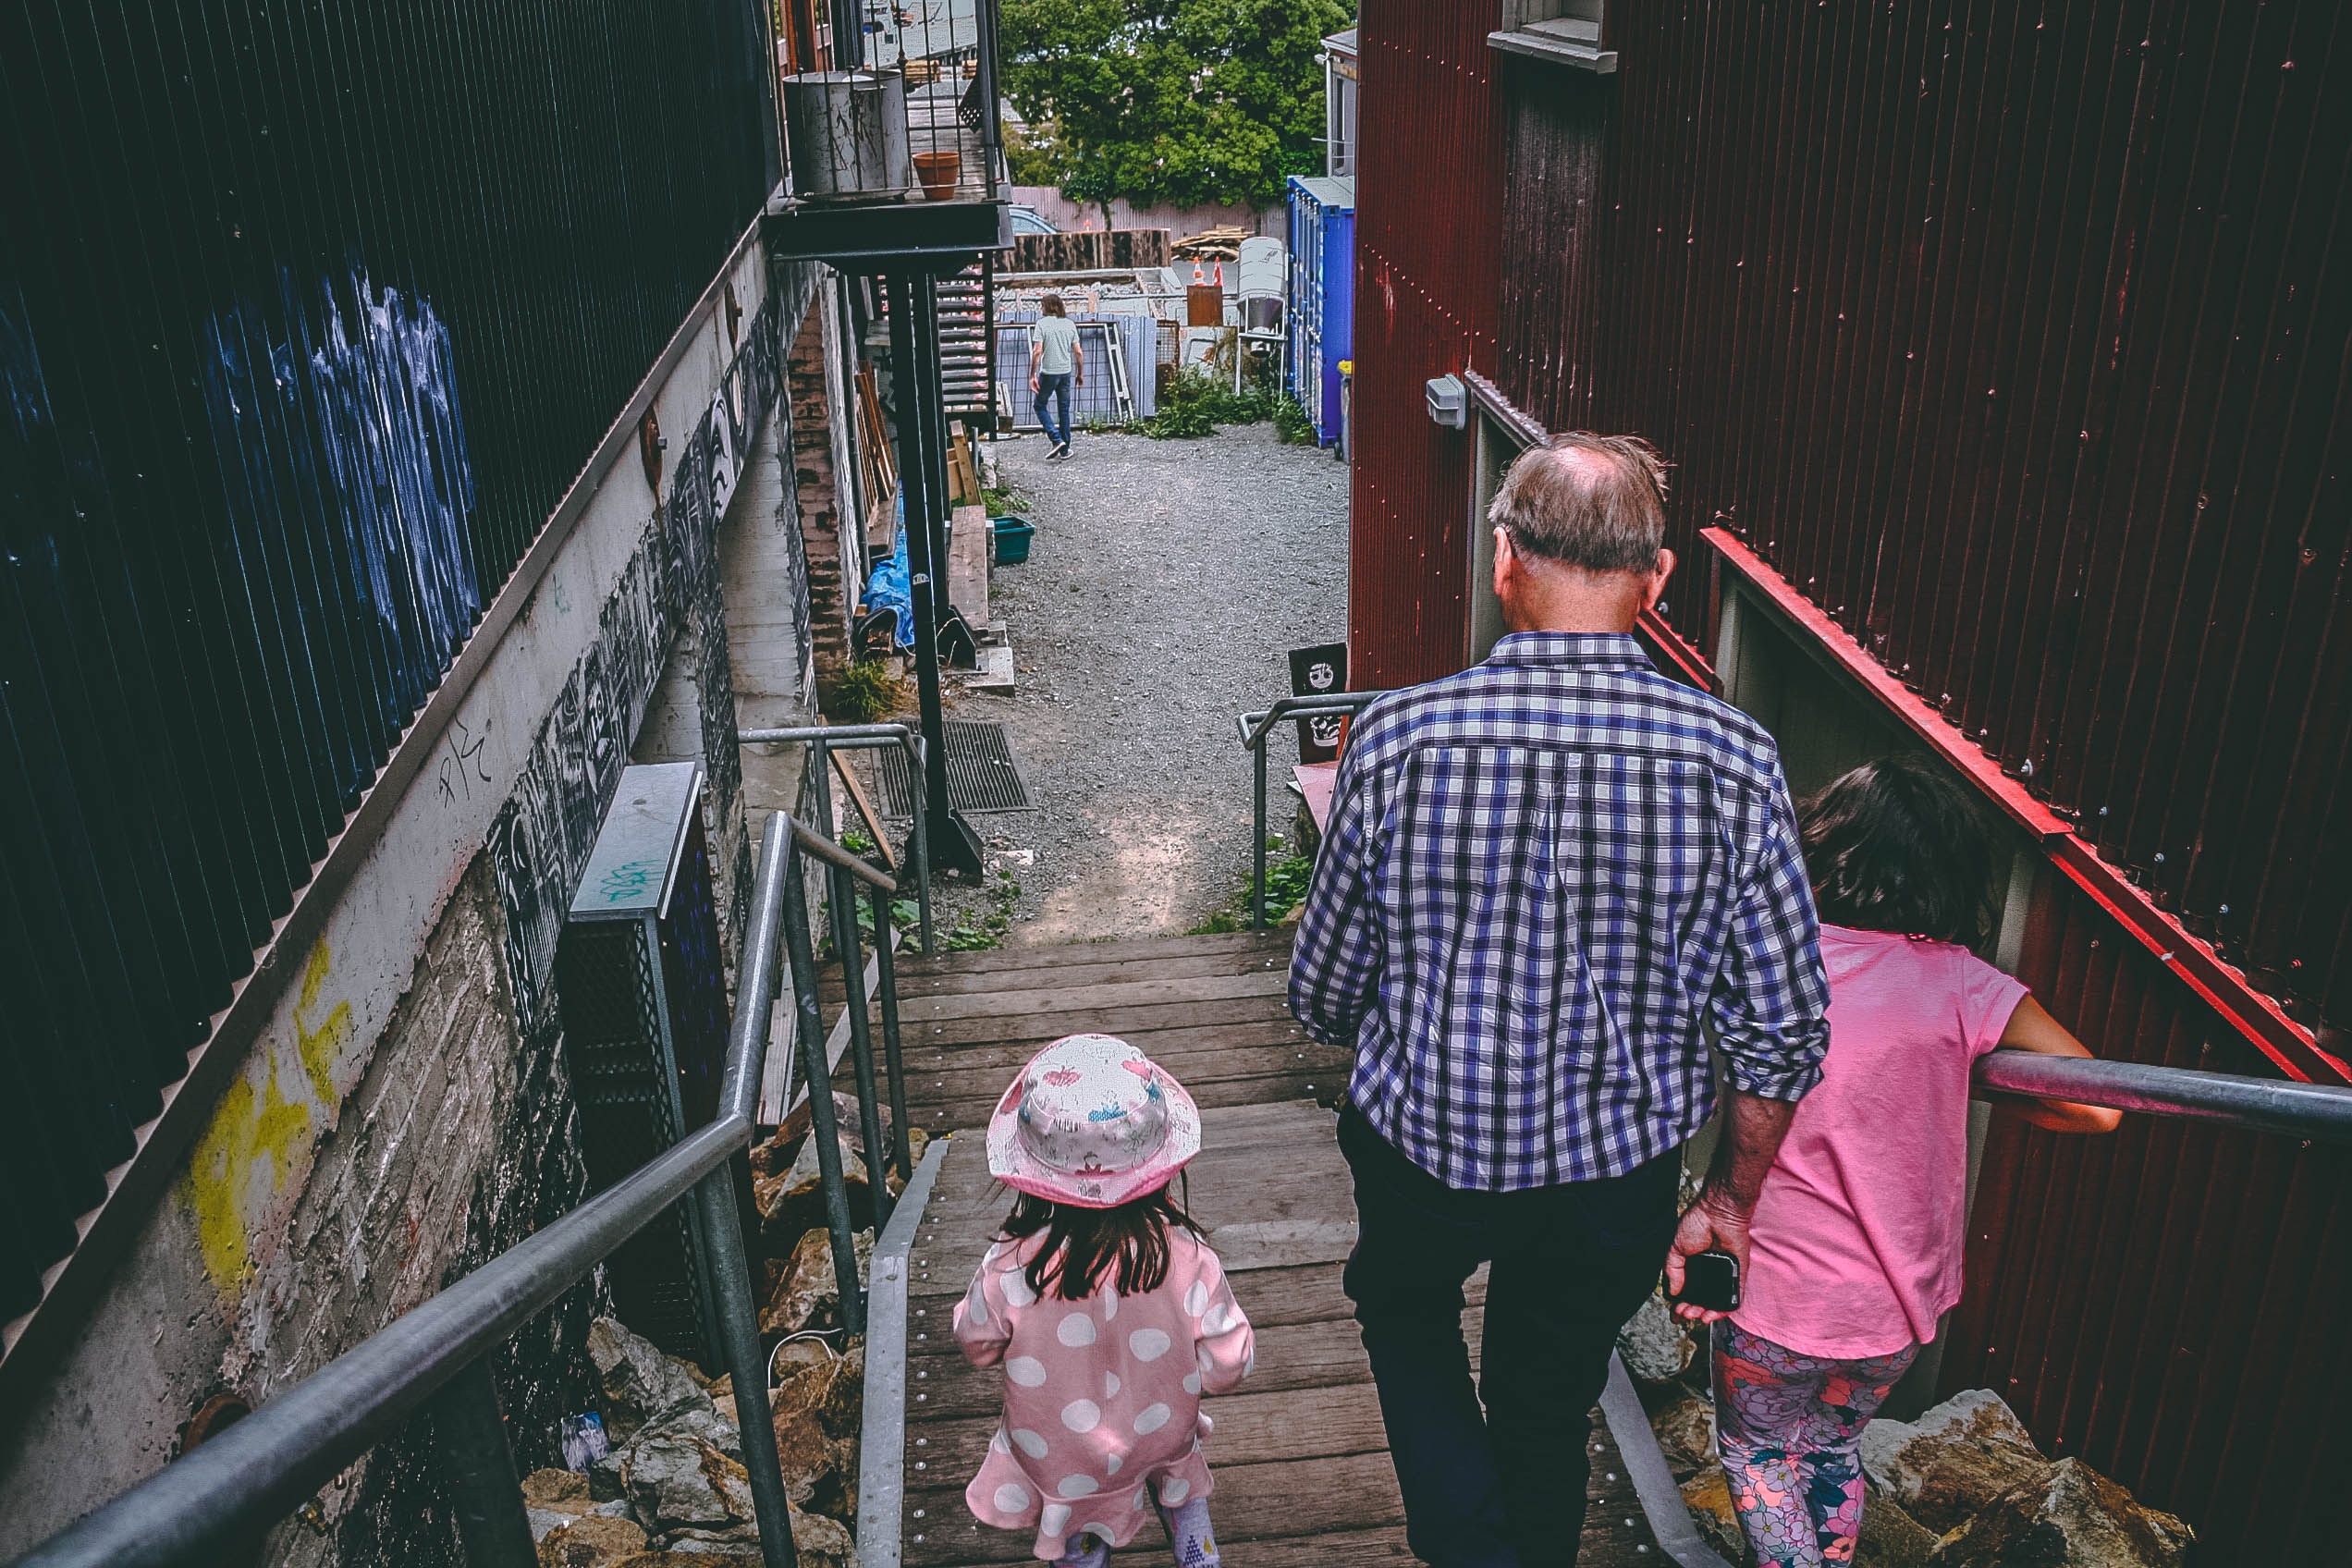 Two little girls on a trip with their grandfather, walking down some stairs into a street - one of the ideas in the The Guide to Giving Experiences as Gifts